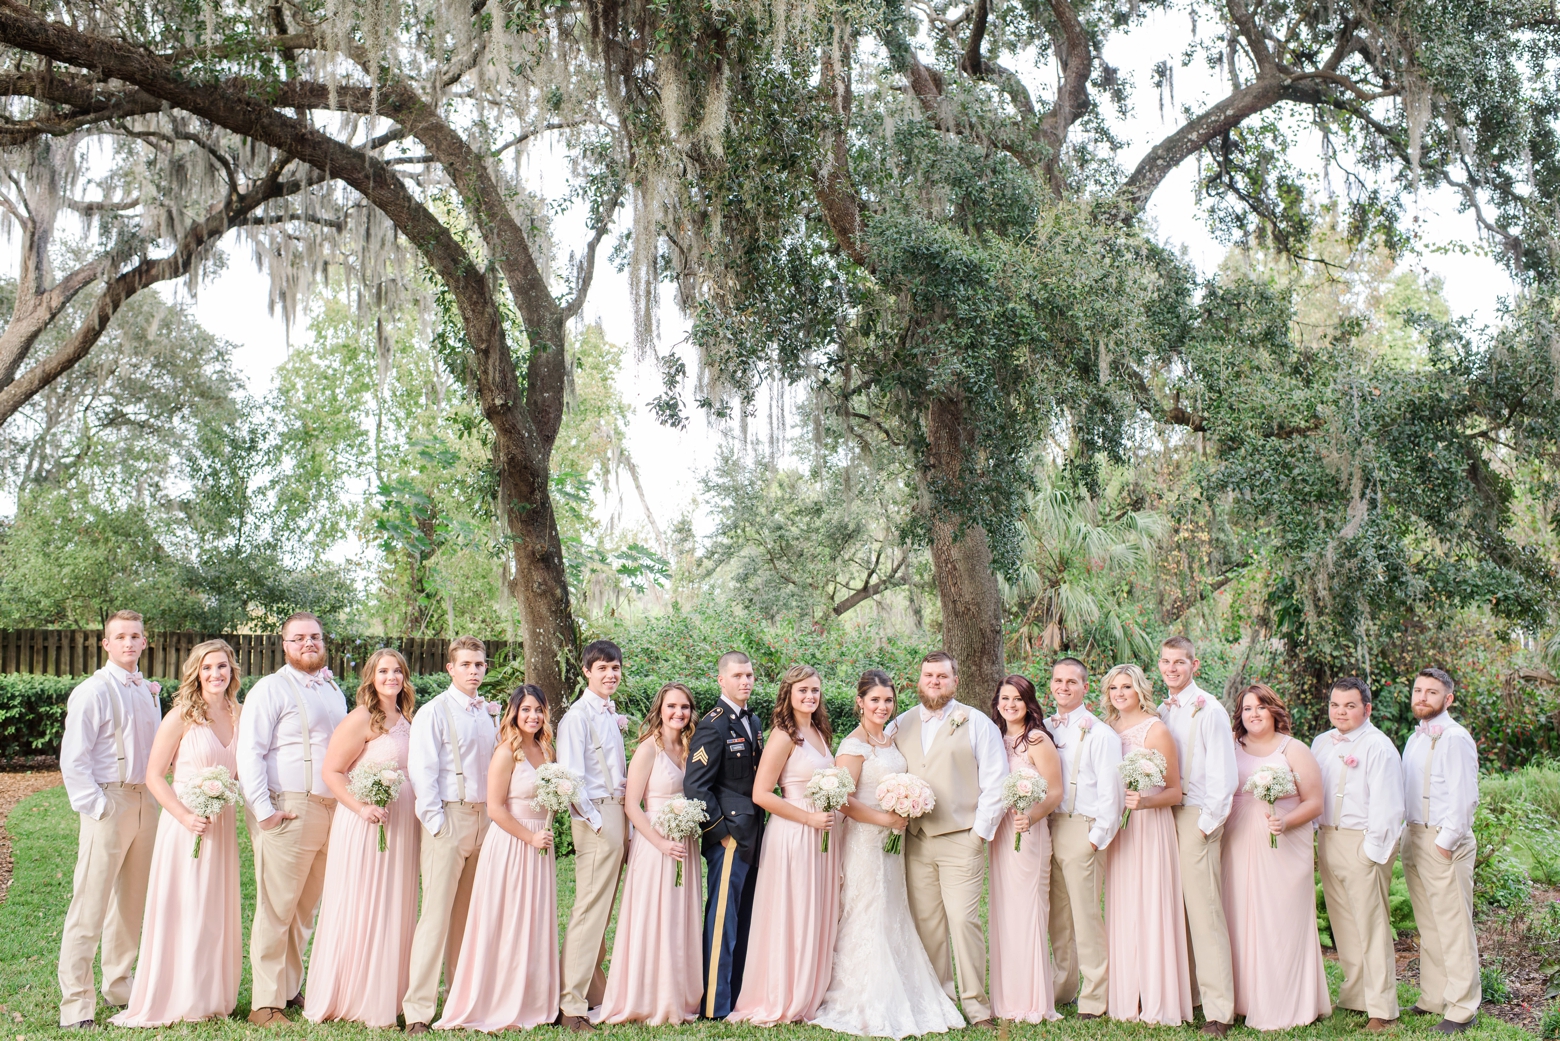 The Wedding party pose for a formal photo under the ancient oaks of Cross Creek Ranch  by Sarah and Ben Photography